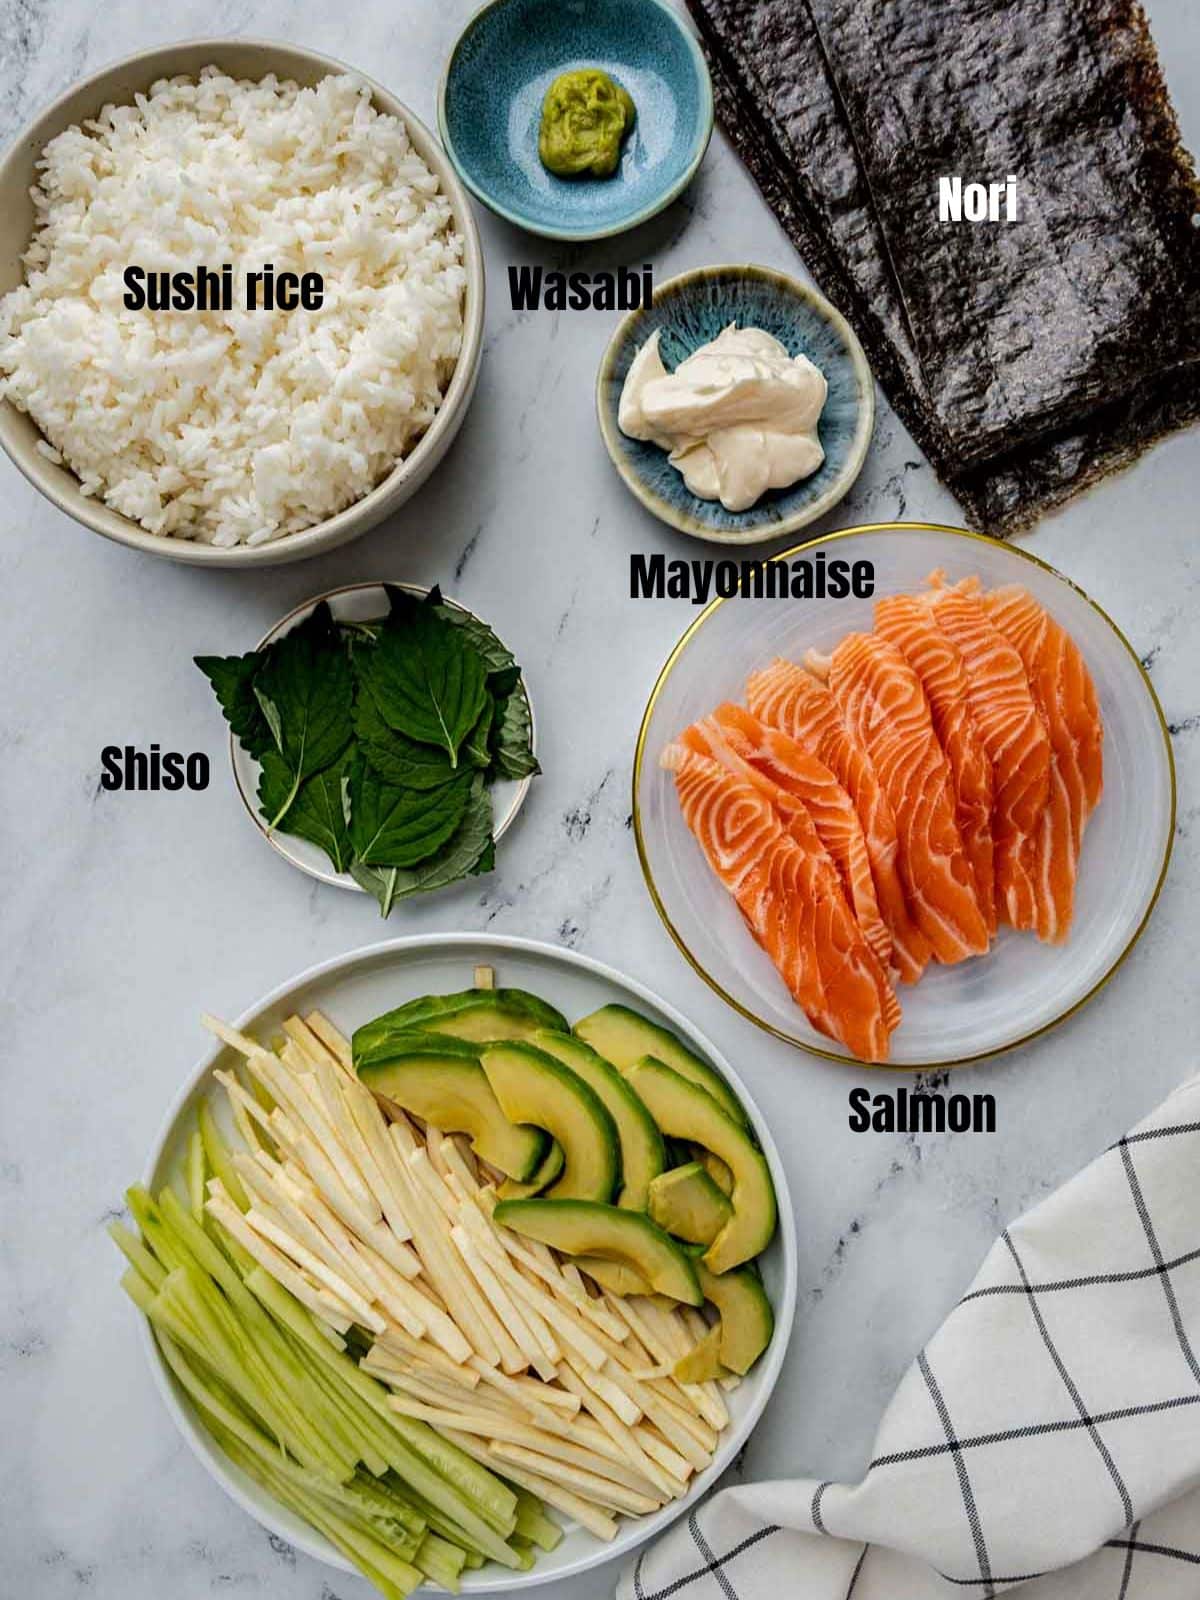 ingredients for temaki sushi on a white table.